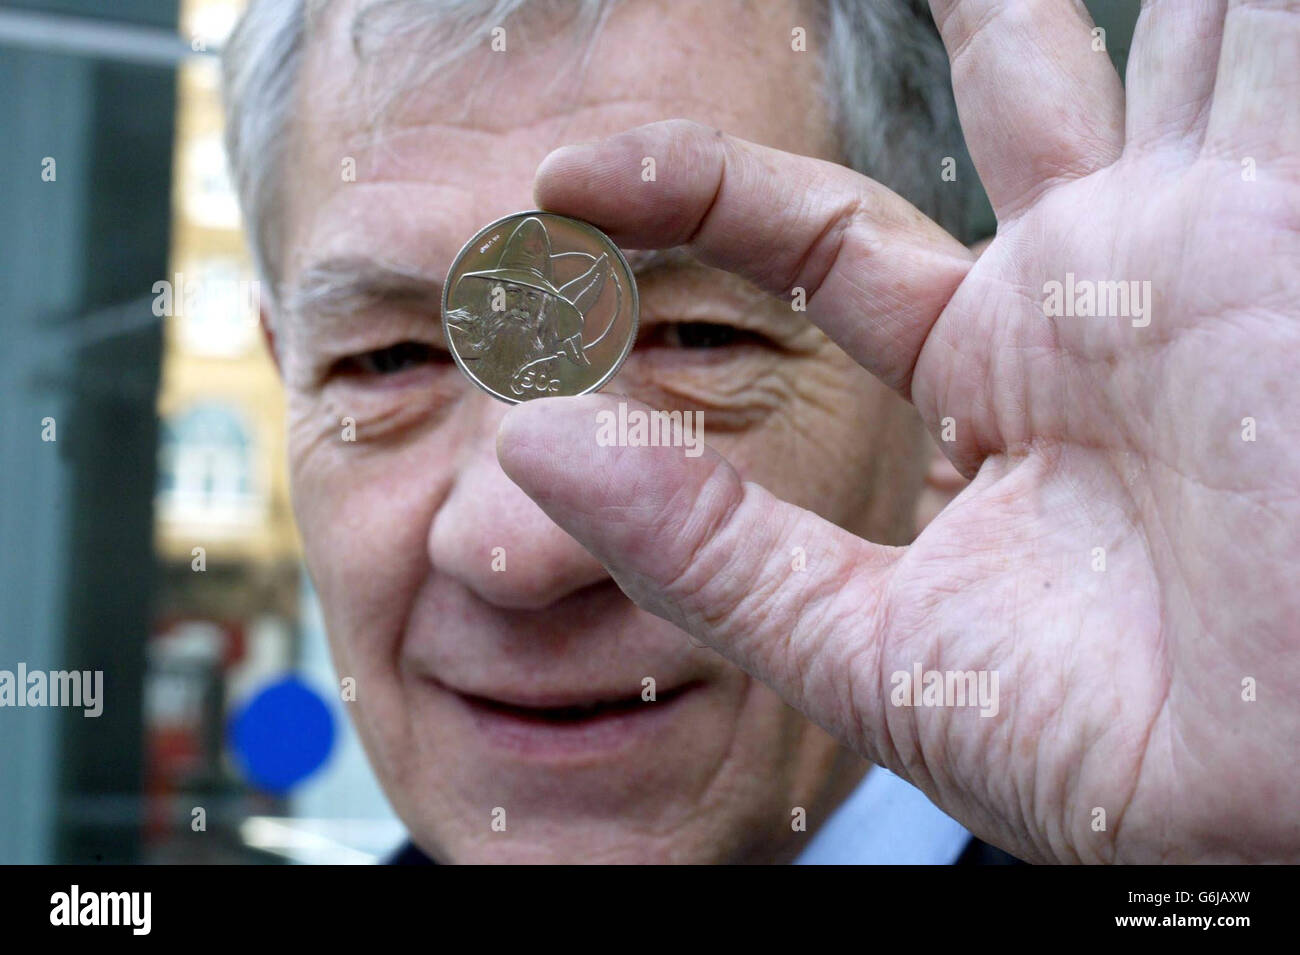 Sir Ian McKellen, who plays Gandalf in the Lord of The Rings Trilogy, unveils the new Royal Mint coin at the Odeon Leicester Square in London. The Royal Mint in conjunction with official licensee, New Zealand Post launches the first of the New Zealand The Lord of The Rings collector coins. Stock Photo